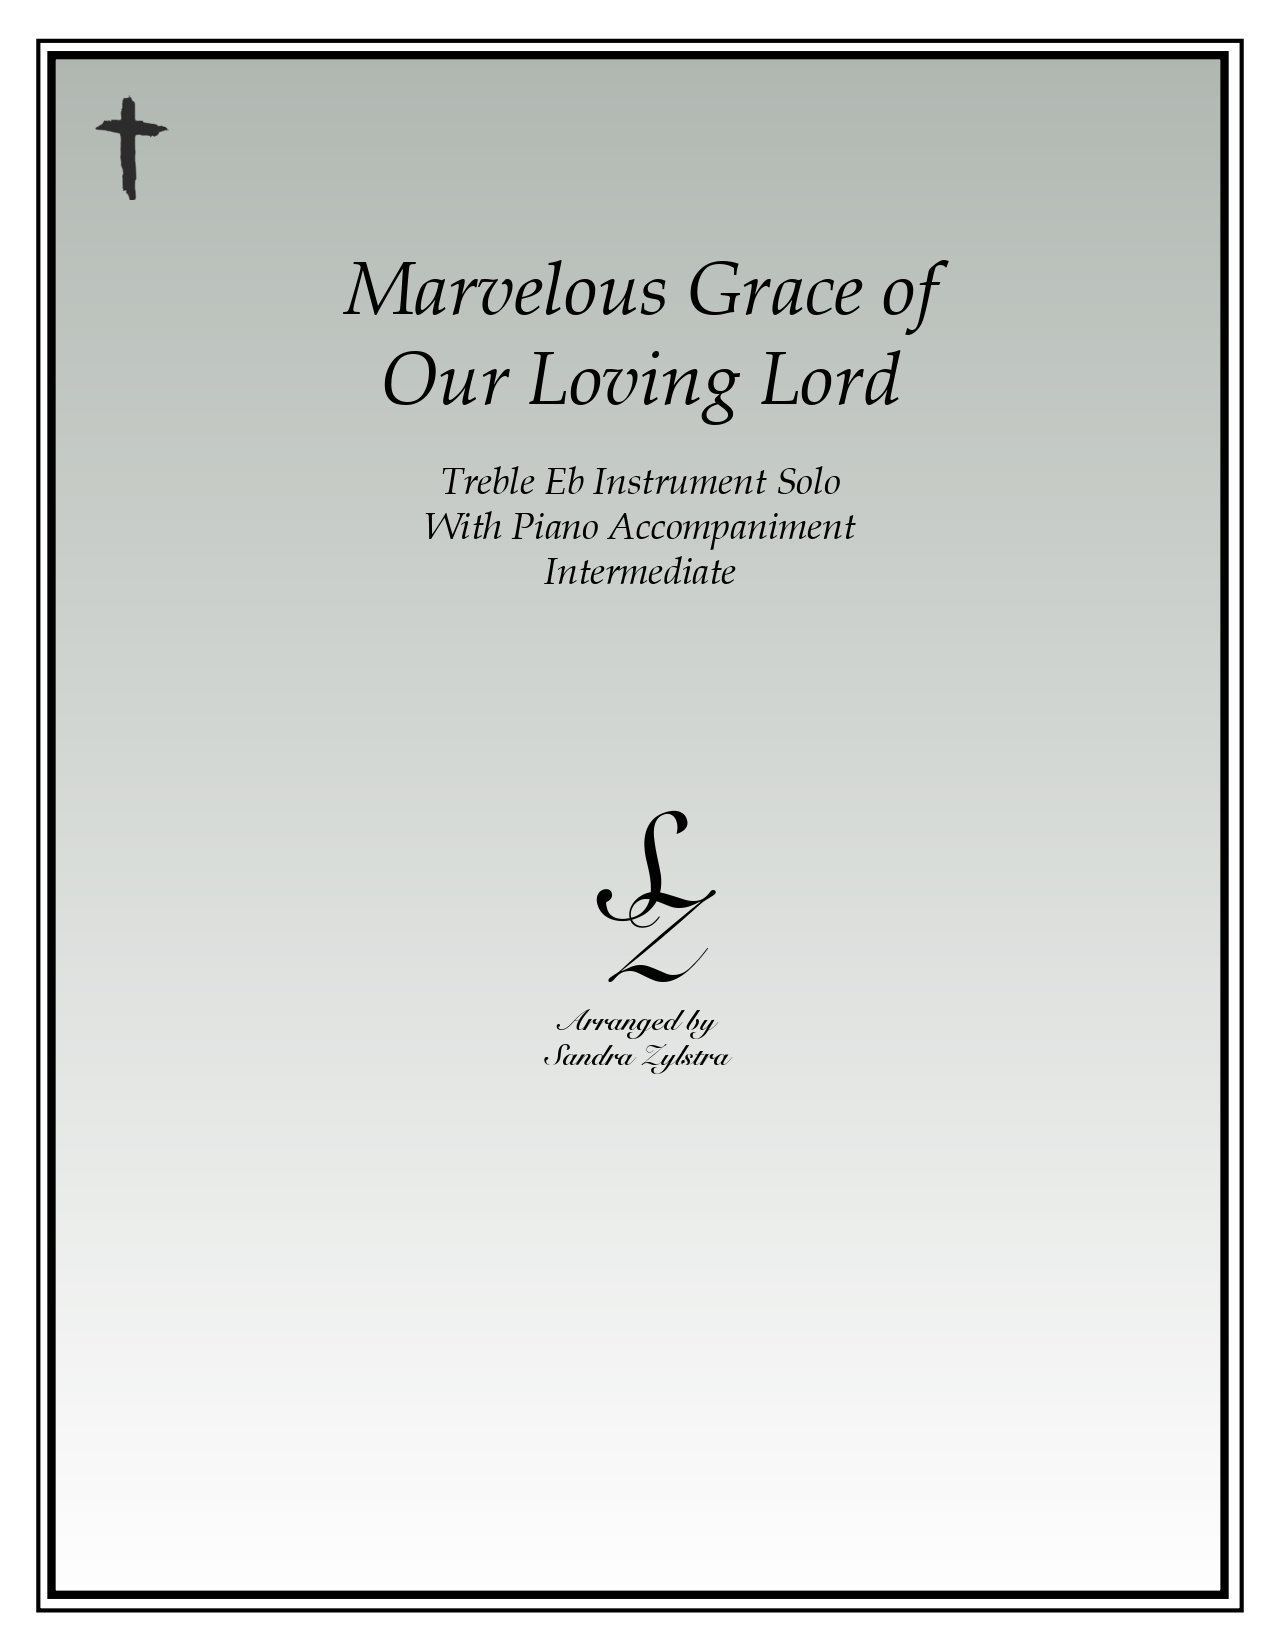 Marvelous Grace Of Our Loving Lord Eb instrument solo part cover page 00011